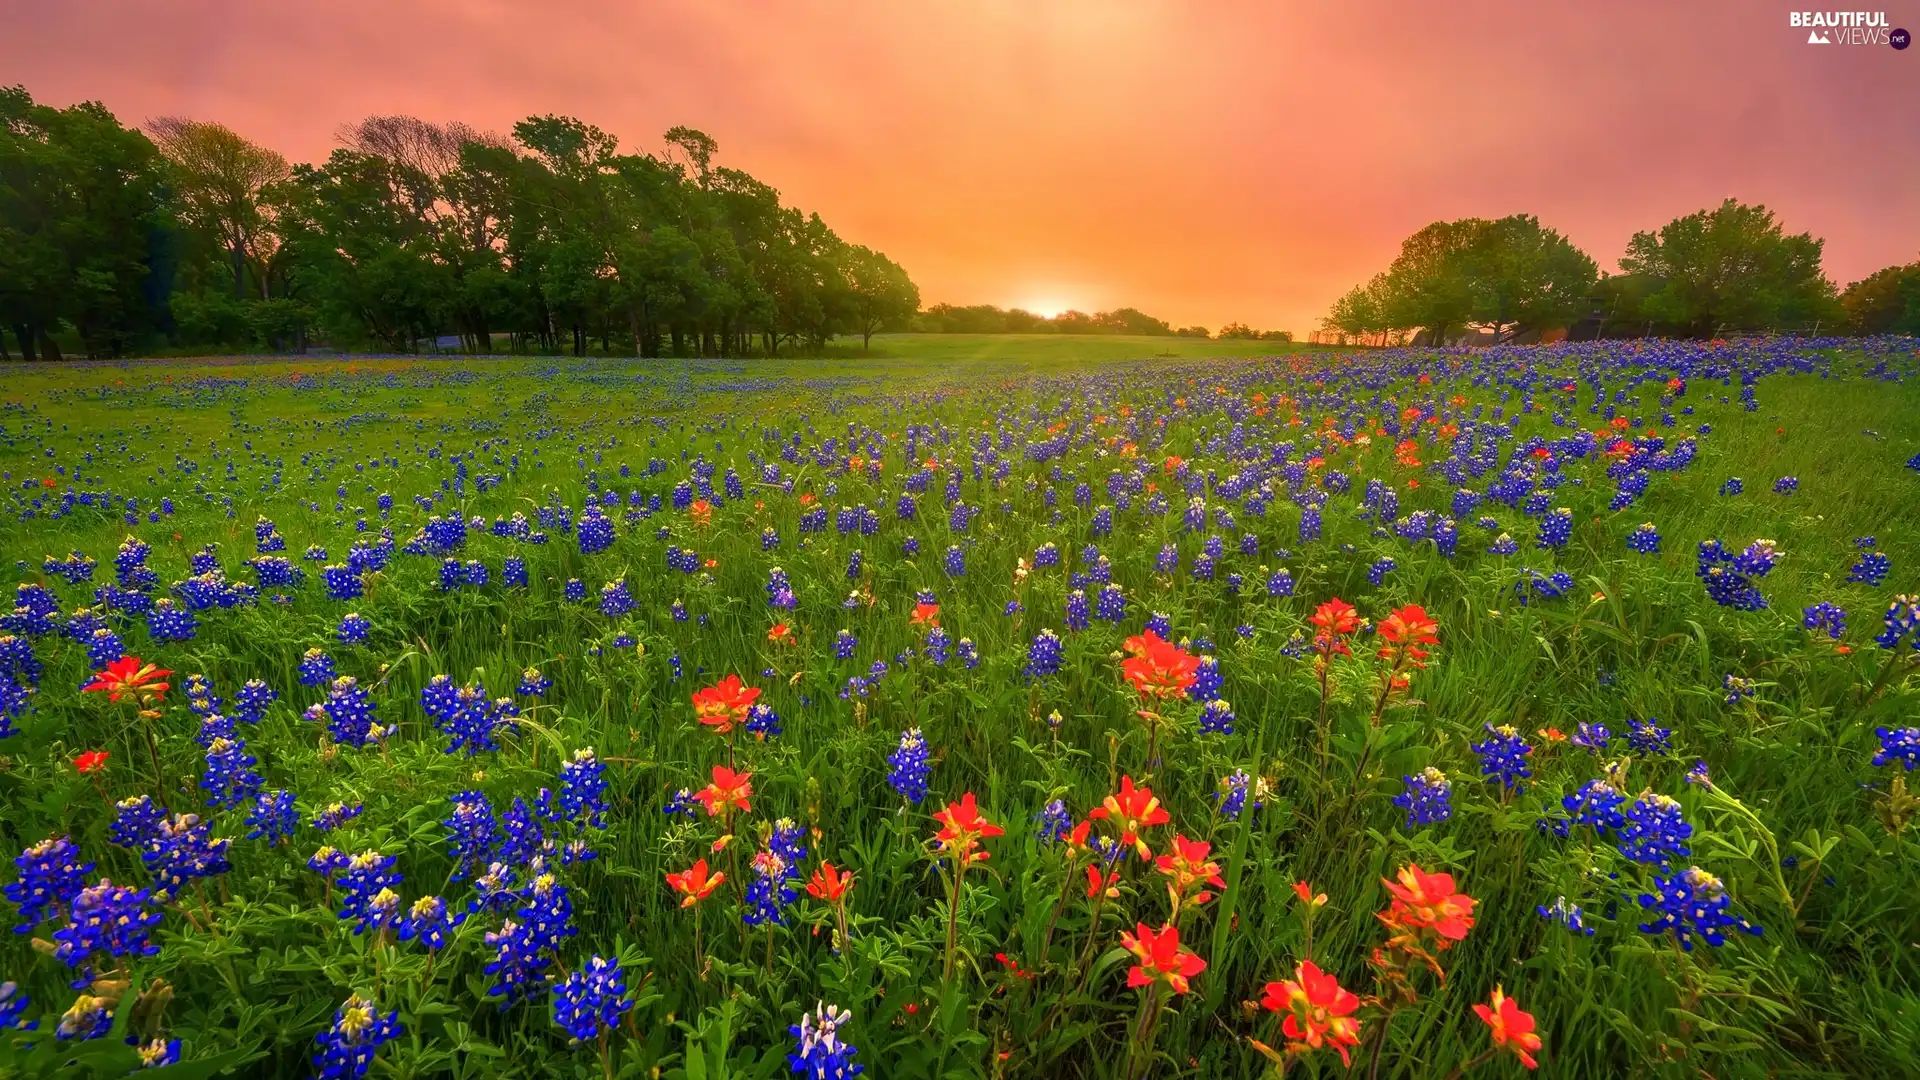 Spring, Meadow, Ennis City, State of Texas, lupine, Great Sunsets, Flowers, Indian Paintbrush, The United States